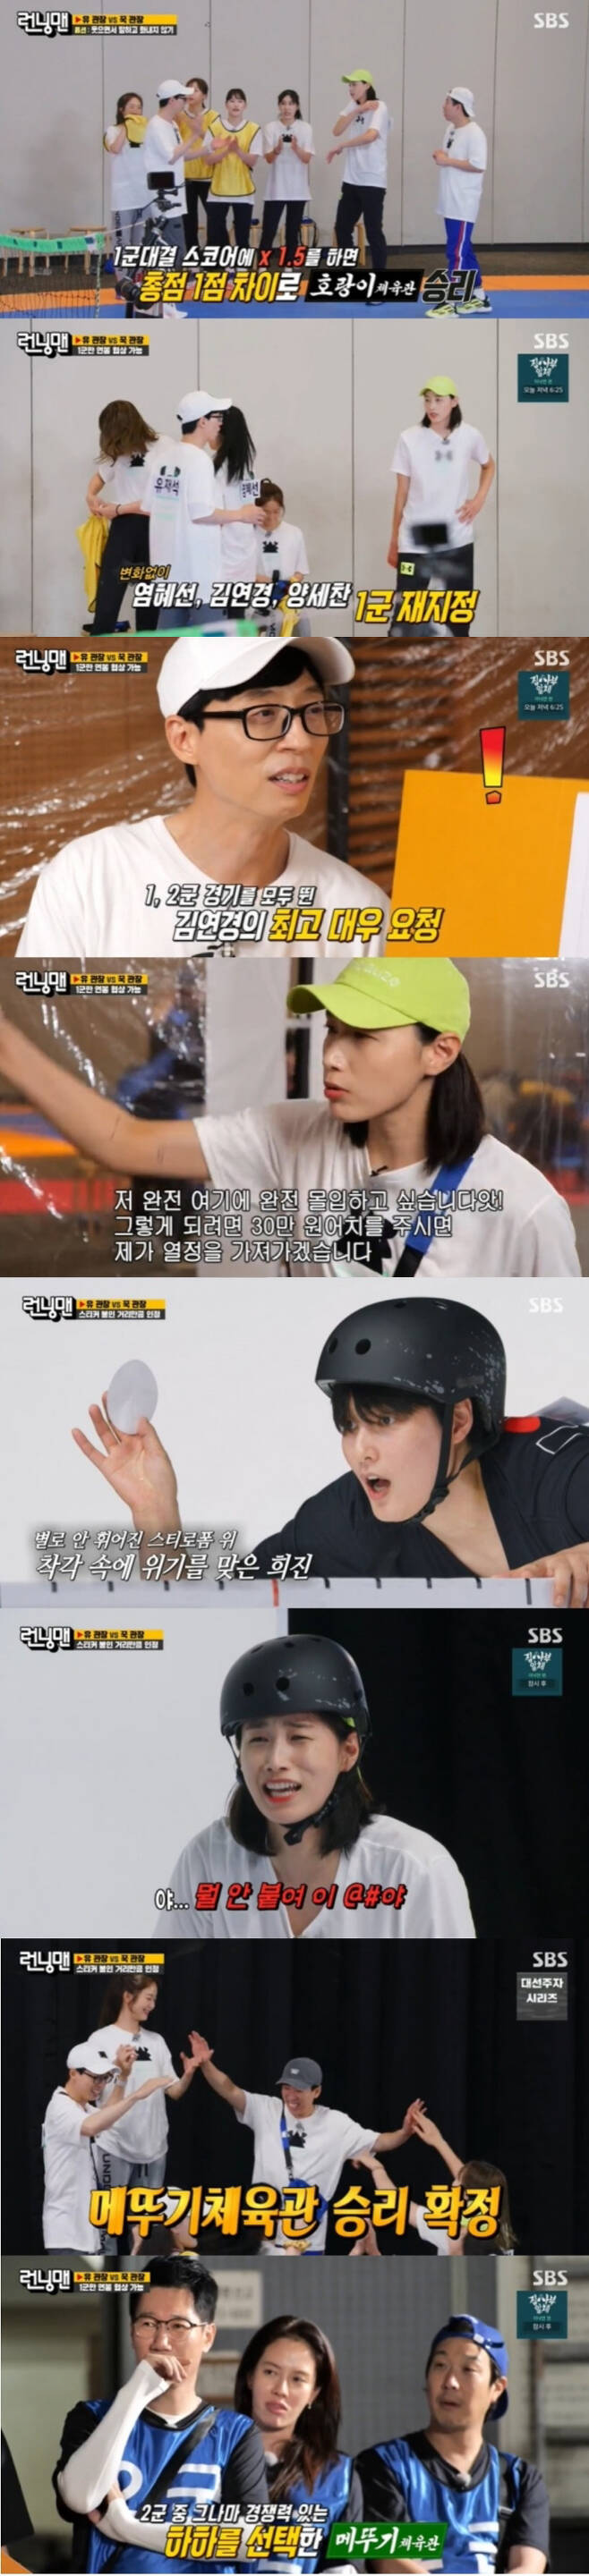 SBS Running Man, which was followed by the womens volleyball team last week, maintained the top spot in the same time TV viewer ratings.Running Man, which was broadcast on the 3rd, recorded 8.8% of the highest TV viewer ratings per minute and 5.9% of the average TV viewer ratings (hereinafter based on Nielsen Korea, metropolitan area), and 2049 TV viewer ratings also showed 2.9%.On the day of the broadcast, Race of the head of the VS Hung Kwan was held after last week, and the last game of the unfinished football Battle was played.In the first round, the Battle of the First Army members Battle Country team won the victory, and in the second round, the team won the second round with a large number of members, but the team won the first round.Since then, each team has started Salary Movie - The Negotiation, and in this process, Kim Wongsoo Kim Yeon-koung s performance laughed.Yoo Jae-Suk tried to slap Salary, and Kim Yeon-koung demanded 300,000 One, the highest treatment, saying I make a sad sound first.Yoo Jae-Suk was angry at Kim Yeon-koung, who pushed hard, saying, Are you Kwangsoo? and eventually Kim Yeon-koung re-signed for 230,000 One.Then, a sticker on the bridge was attached to Battle. Song Ji-hyo and Kim Yeon-koung were outstanding.Song Ji-hyo flew and sent hearts to panic the director, saying, My brother (successed).On the other hand, Kim Yeon-koung of Yus team was not able to play properly because he was scared, and the team of the manager was laughing when he turned into a unique bread sisterThe scene was the best TV viewer rating per minute with 8.8%, and the team won the best one minute.Another Salary Movie - The Negotiation Time was given.Yoo Jae-Suk decided on the trade of Jeon So-min, saying, Someone went to another team and found out Salary. Jeon So-min and Haha were traded.Next weeks broadcast will feature the final Battle of the two manager teams.